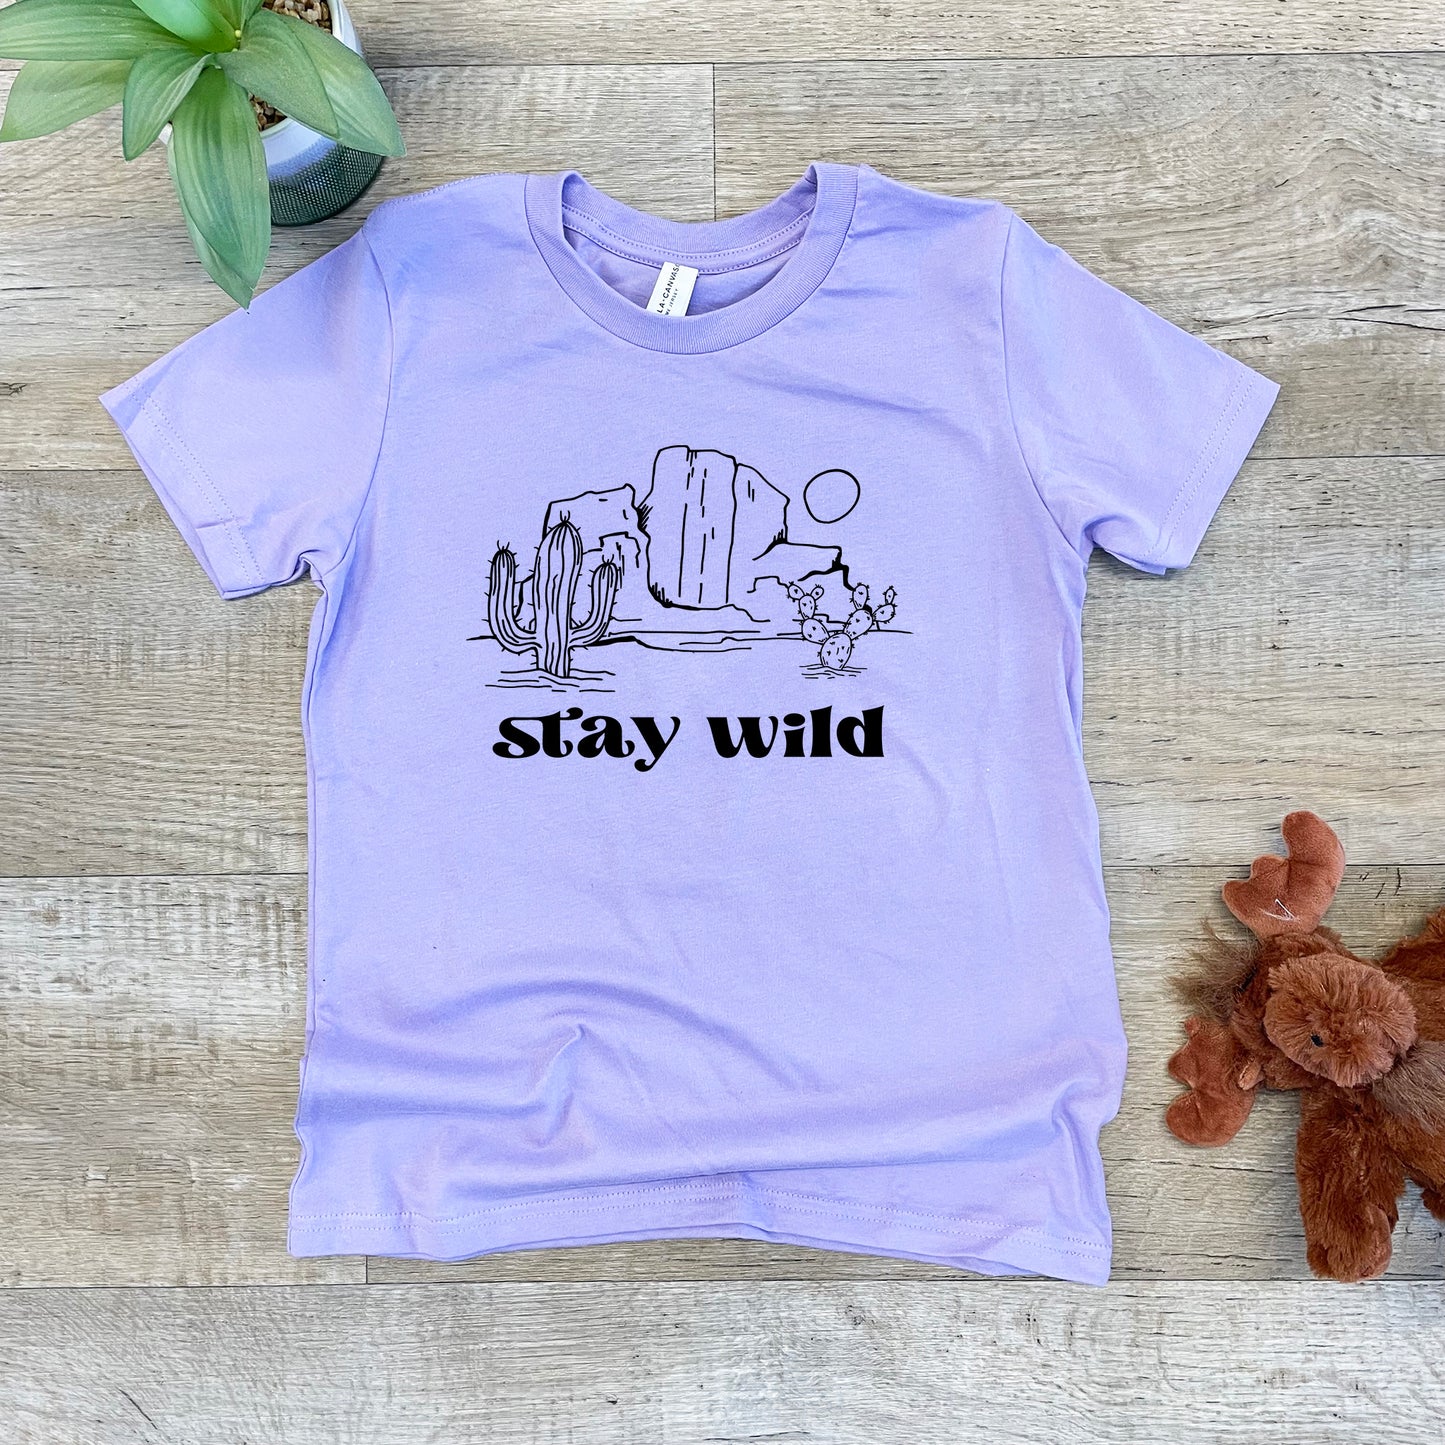 Stay Wild - Kid's Tee - Blue or Lavender